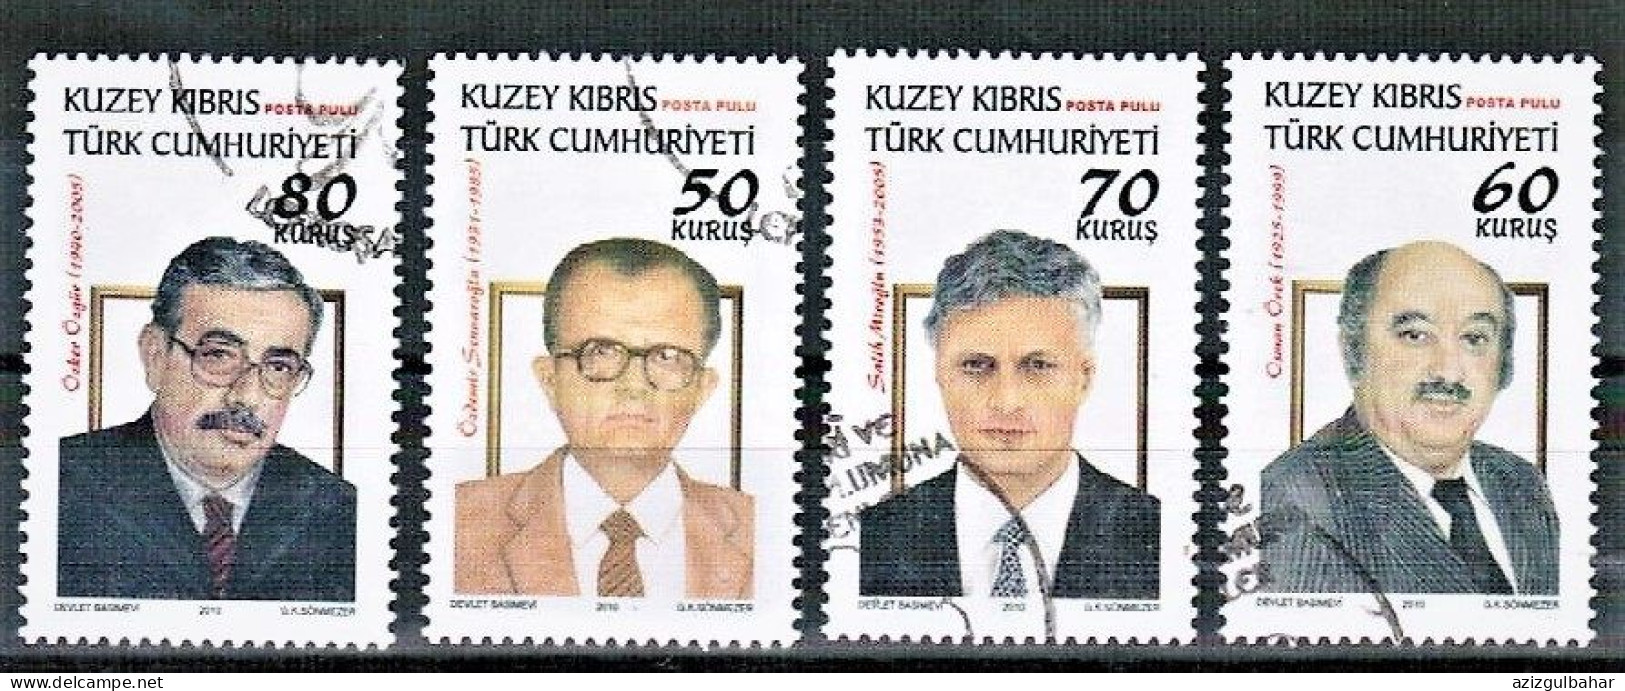 2010 - FAMOUS PEOPLE  - ANNIVERSARIES - TURKISH CYPRIOT STAMPS - STAMPS - USED - Usados